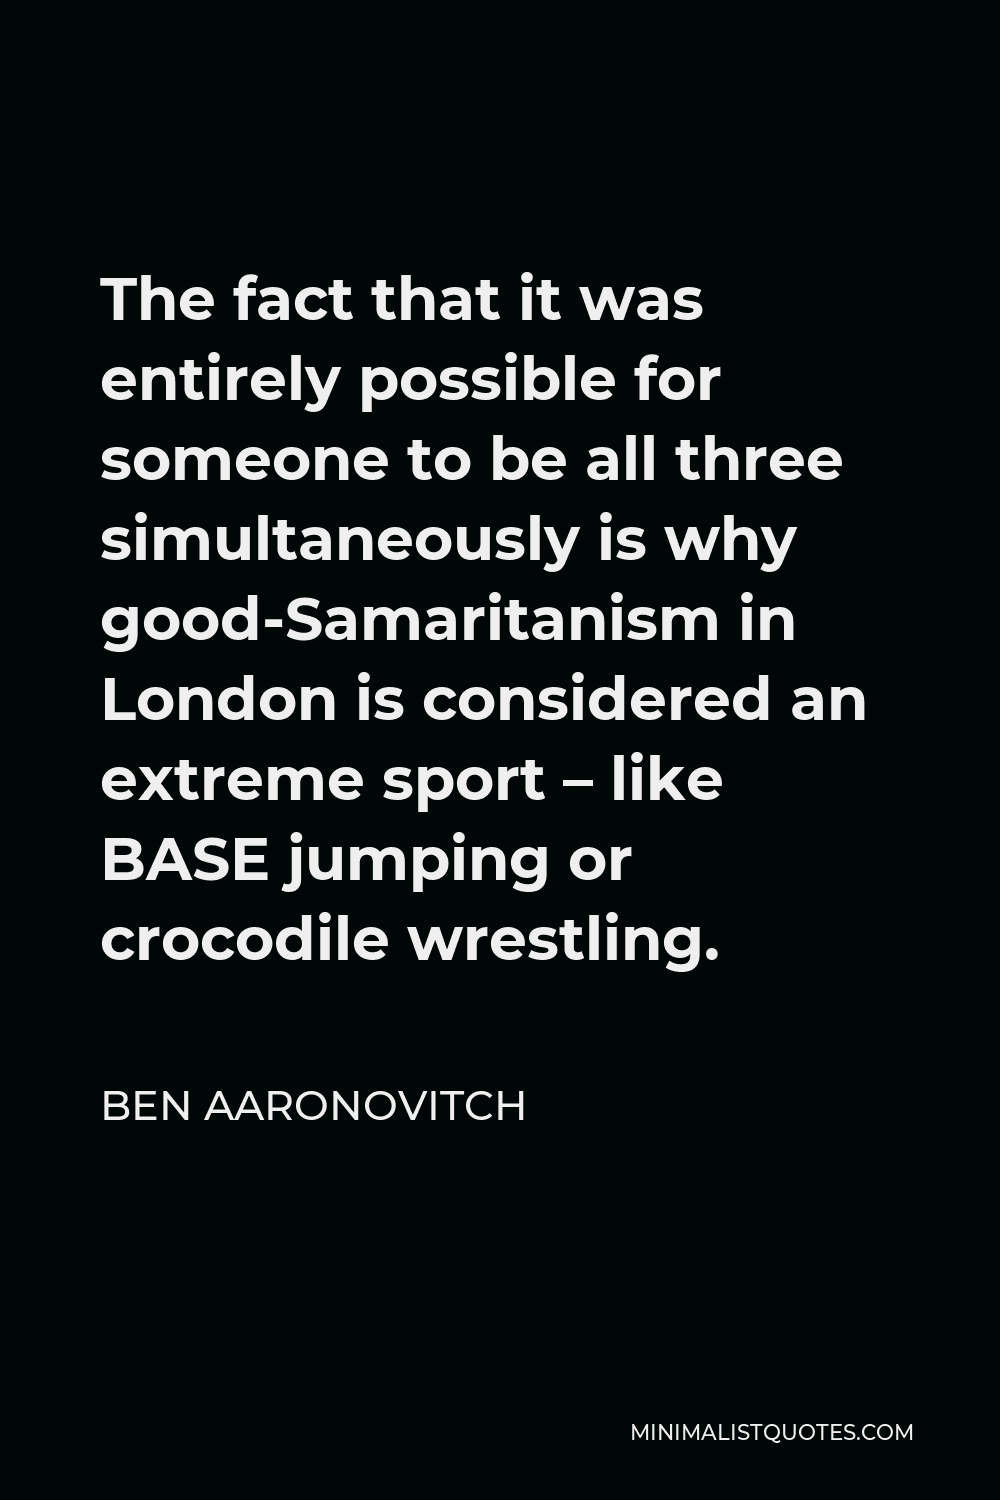 Ben Aaronovitch Quote - The fact that it was entirely possible for someone to be all three simultaneously is why good-Samaritanism in London is considered an extreme sport – like BASE jumping or crocodile wrestling.